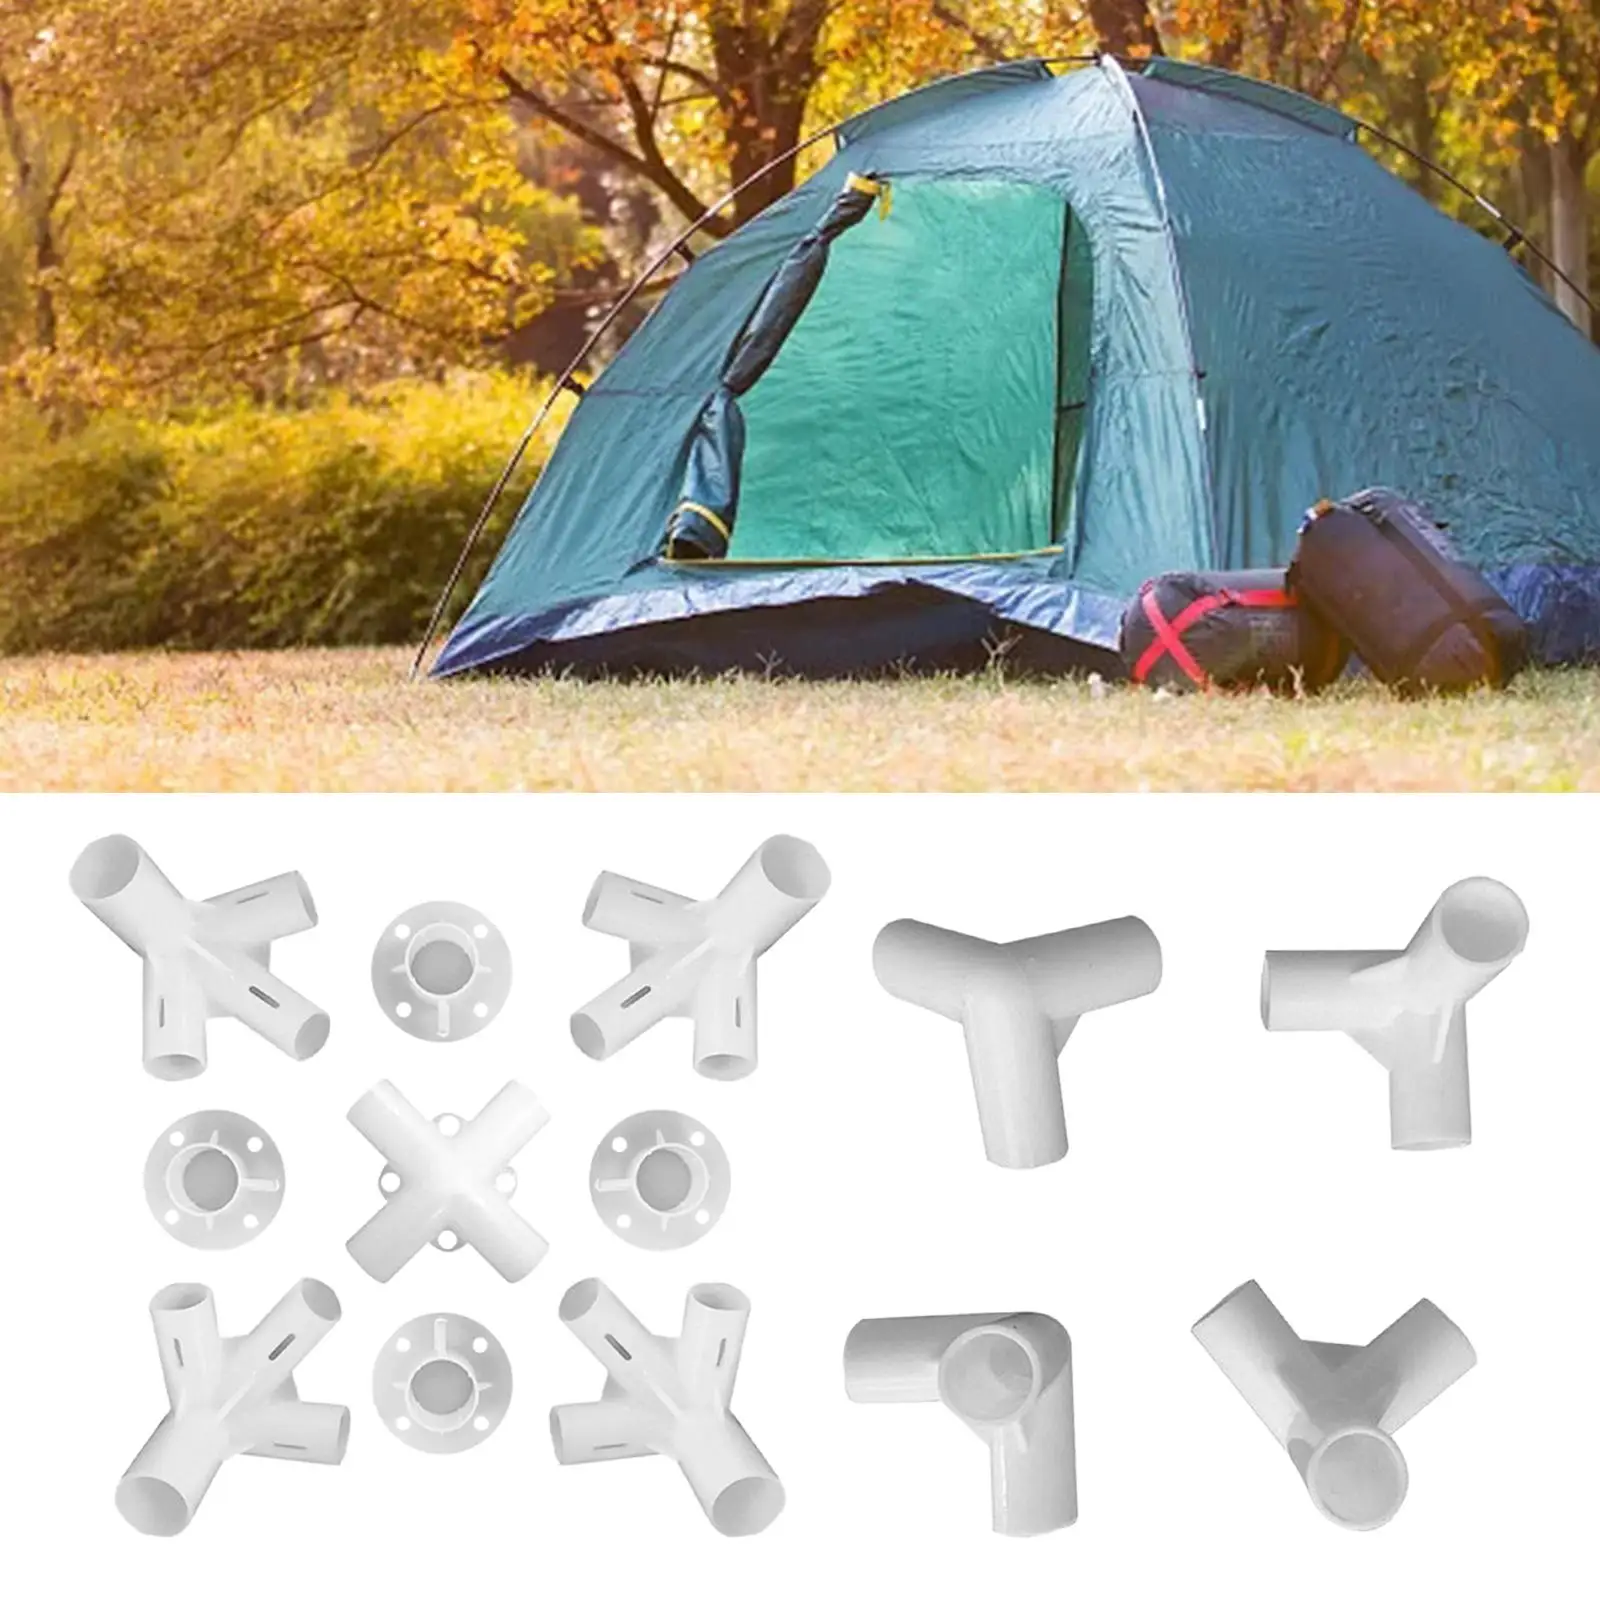 13 Pieces 1 Set Spare Parts Center Connector Corner Mounting 25/19mm Feet Replacement 3 Outdoor Gazebo Camping